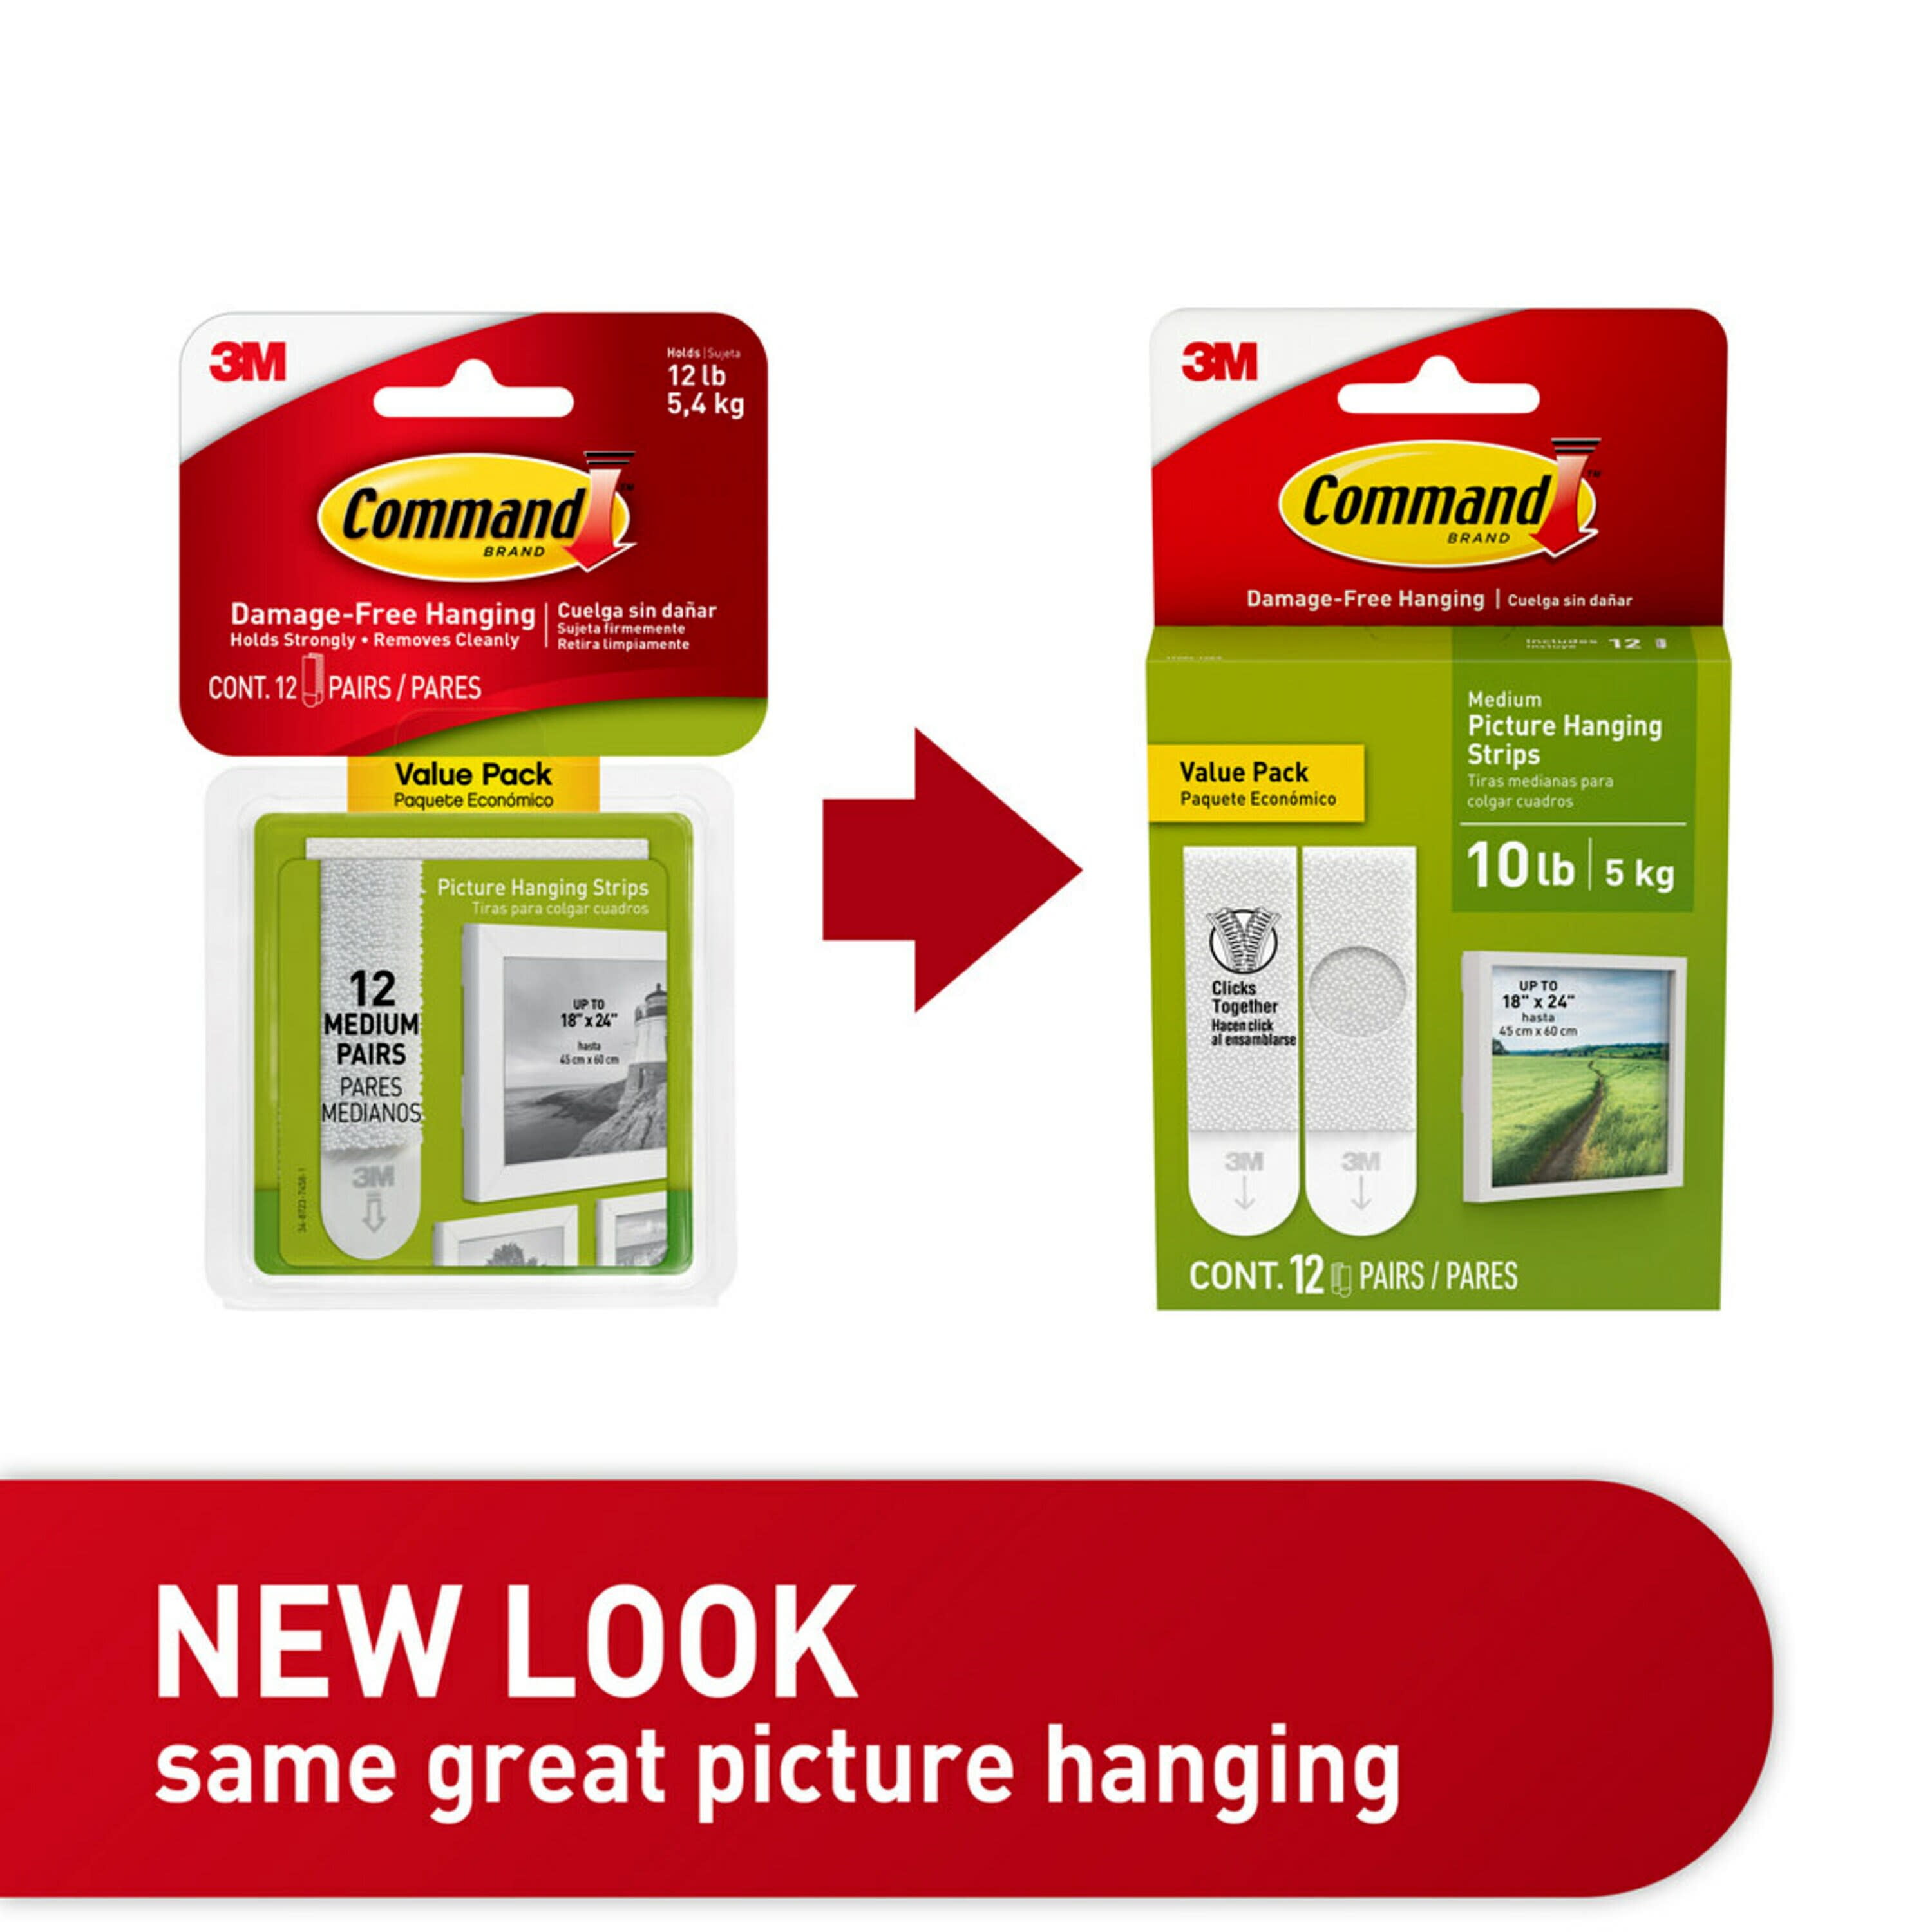 3M Scotch Command Damage-Free Picture Hanging Kit - Meininger Art Supply